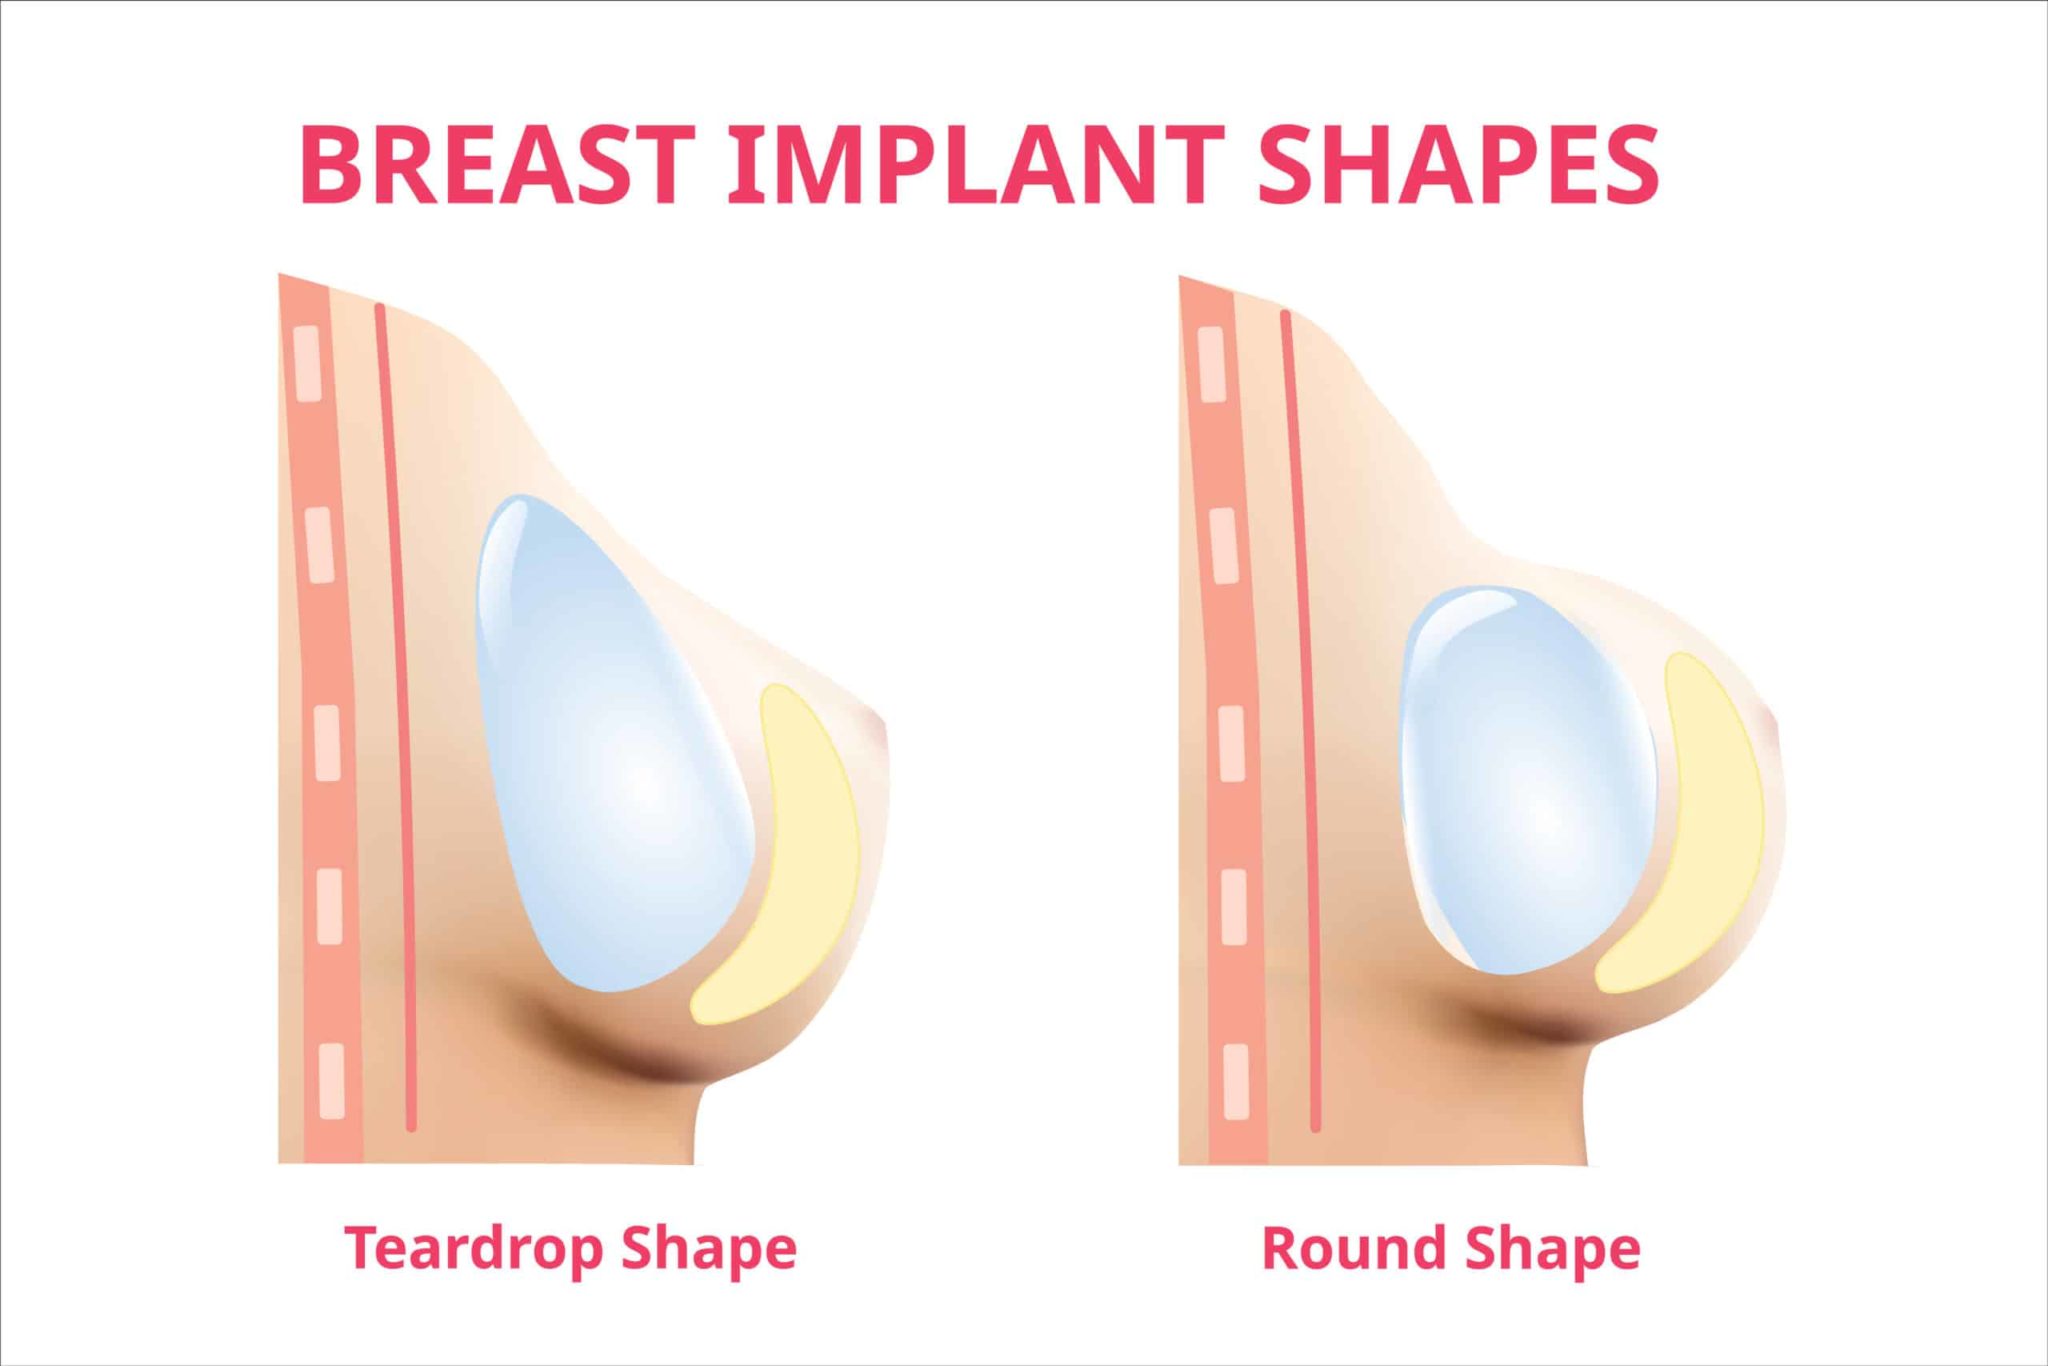 Teardrop vs round breast implants: what's the difference? - Harley